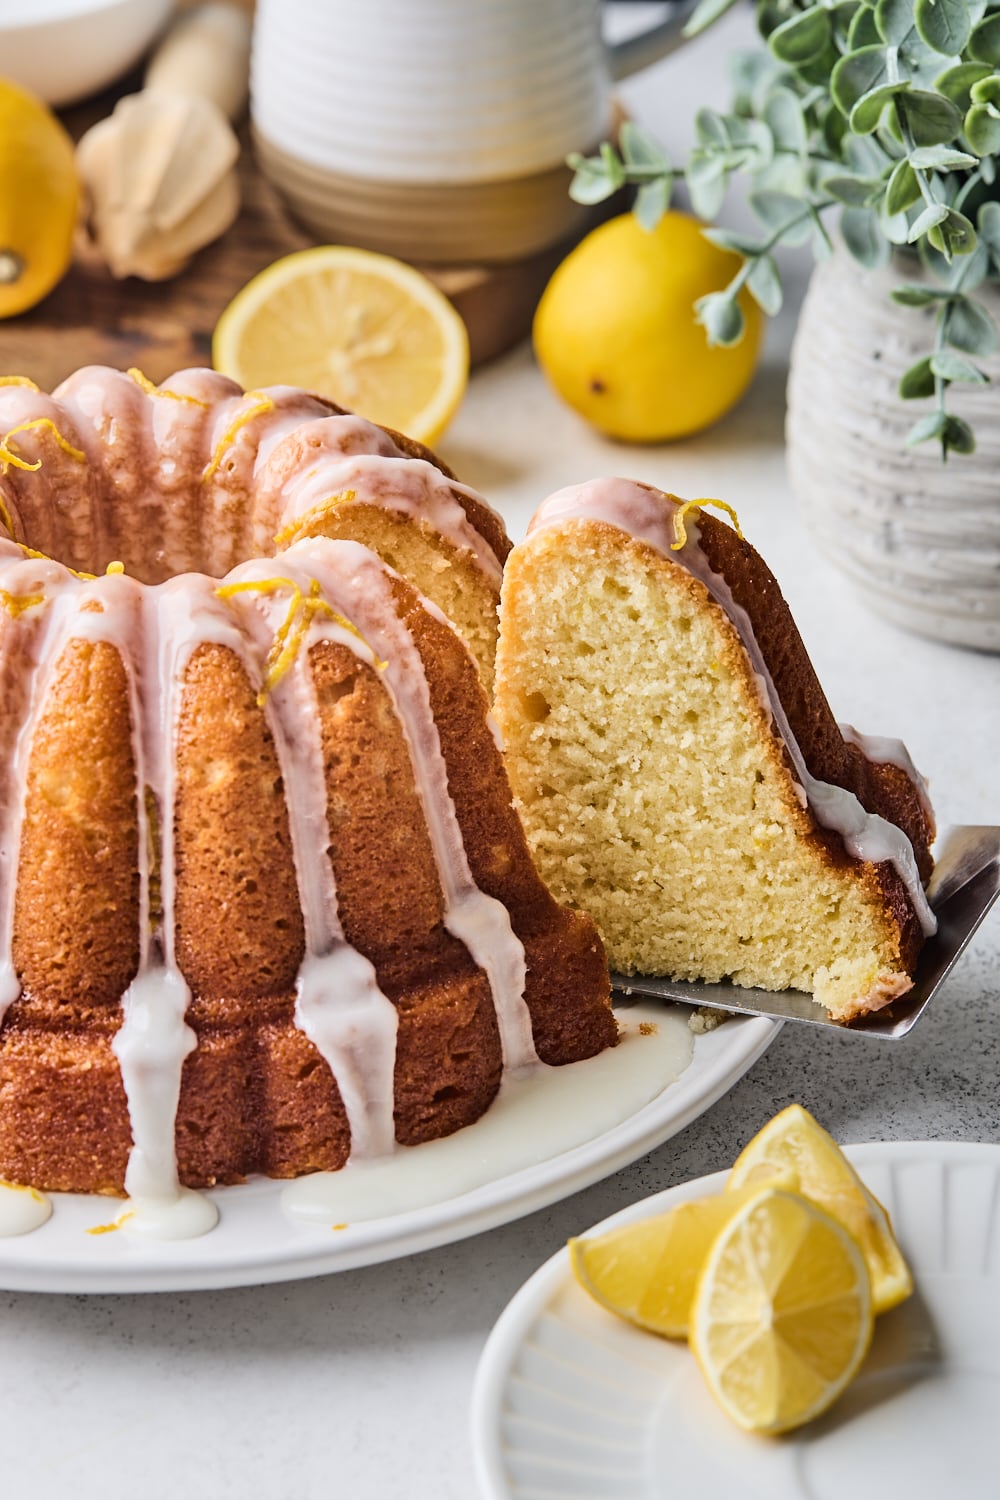 Lemon Bundt Cake with a glaze and a slice being taken out